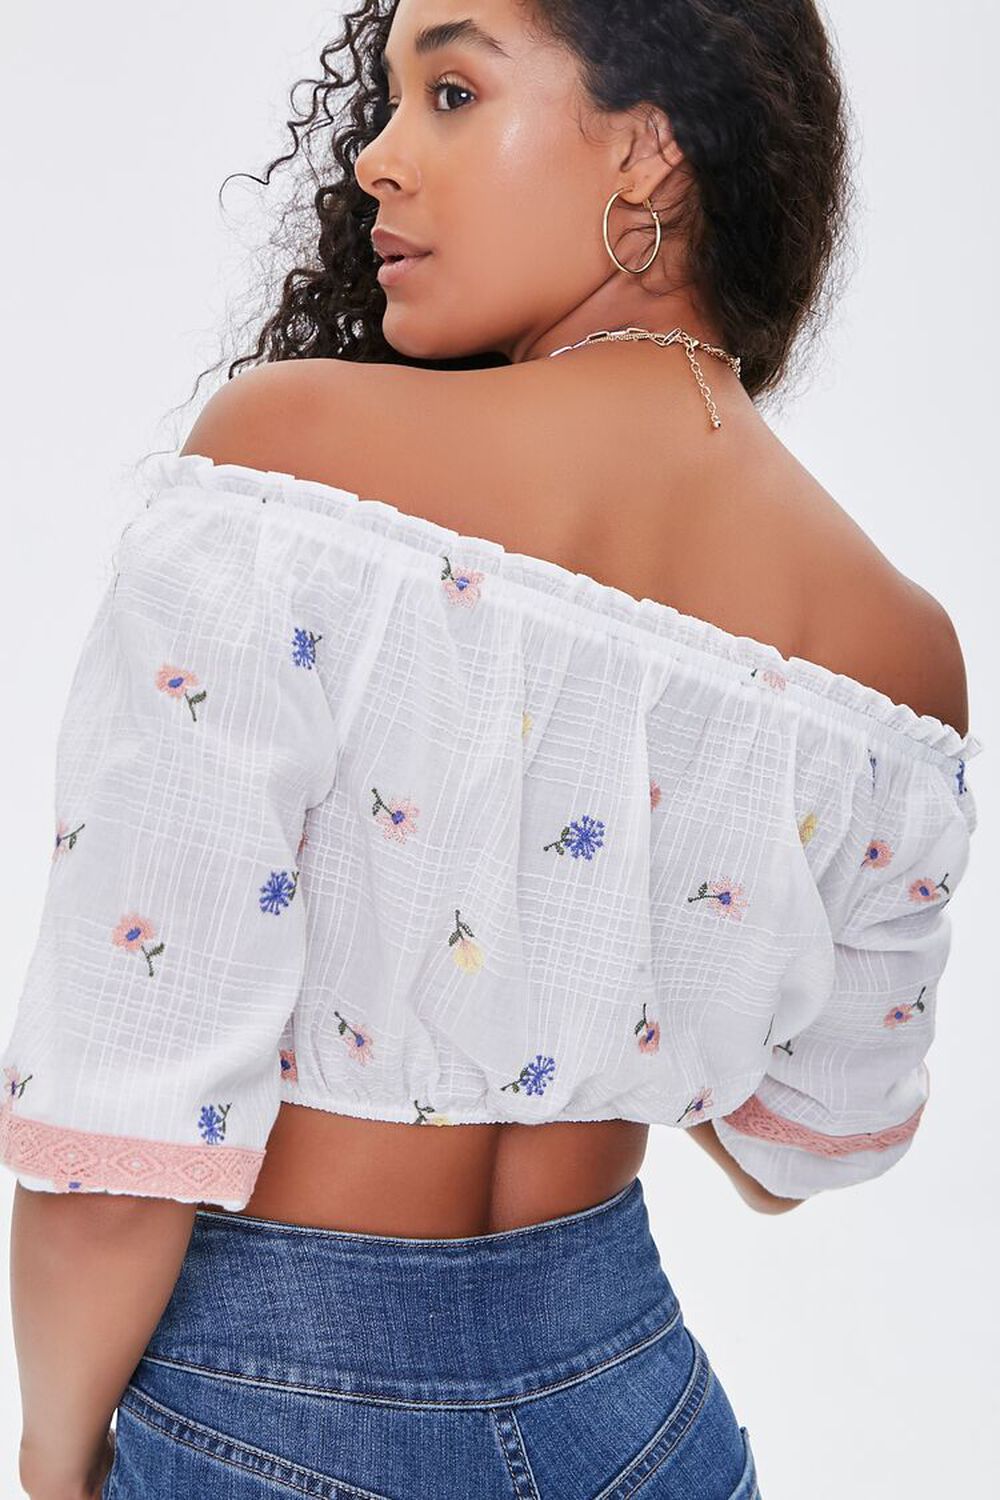 WHITE/MULTI Floral Embroidered Crop Top, image 3